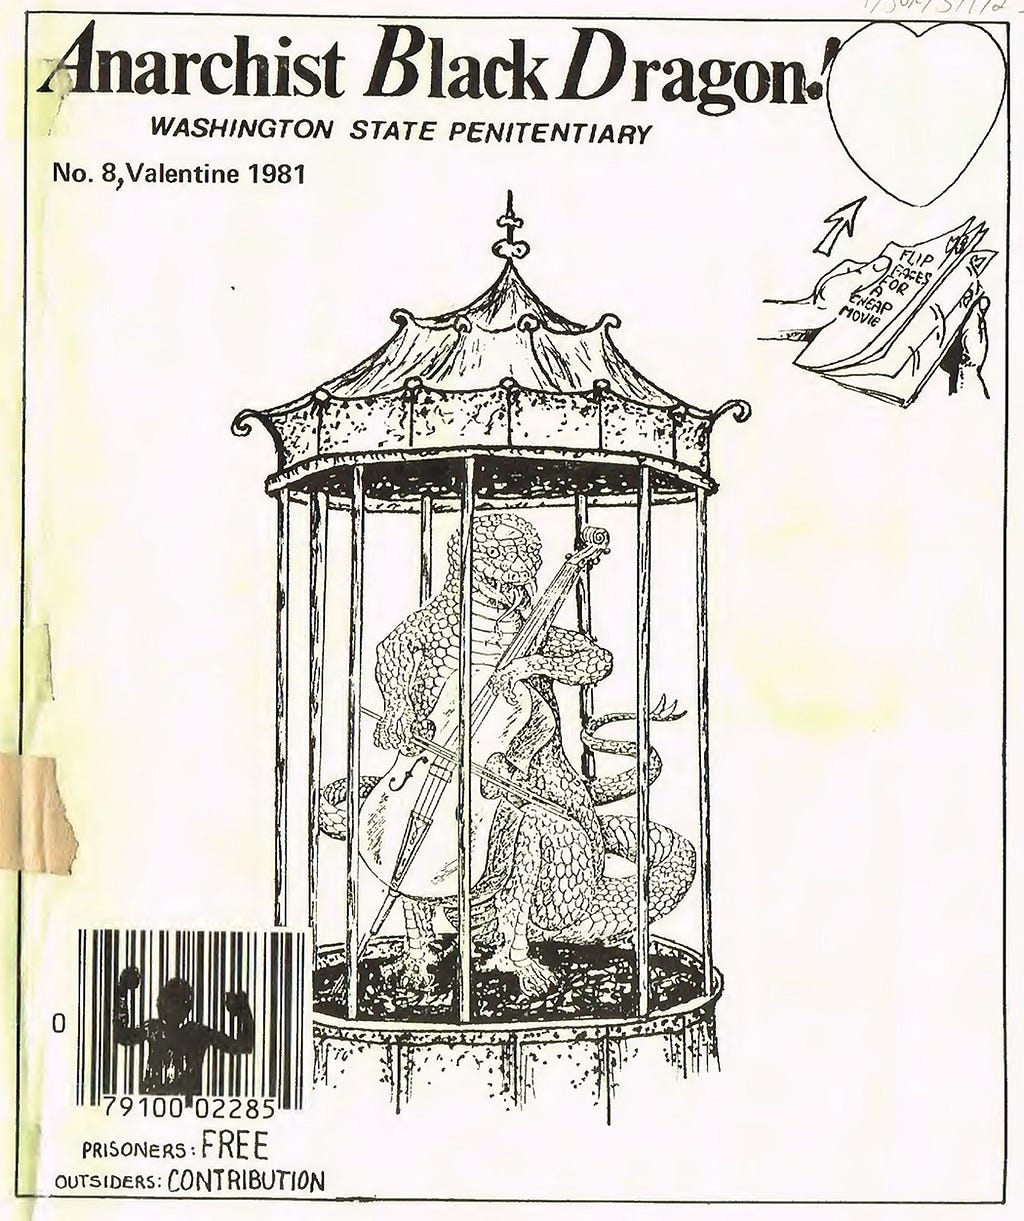 A cover of a magazine, Anarchist Black Dragon, with an illustration of a dragon playing a cello while locked in a cage.